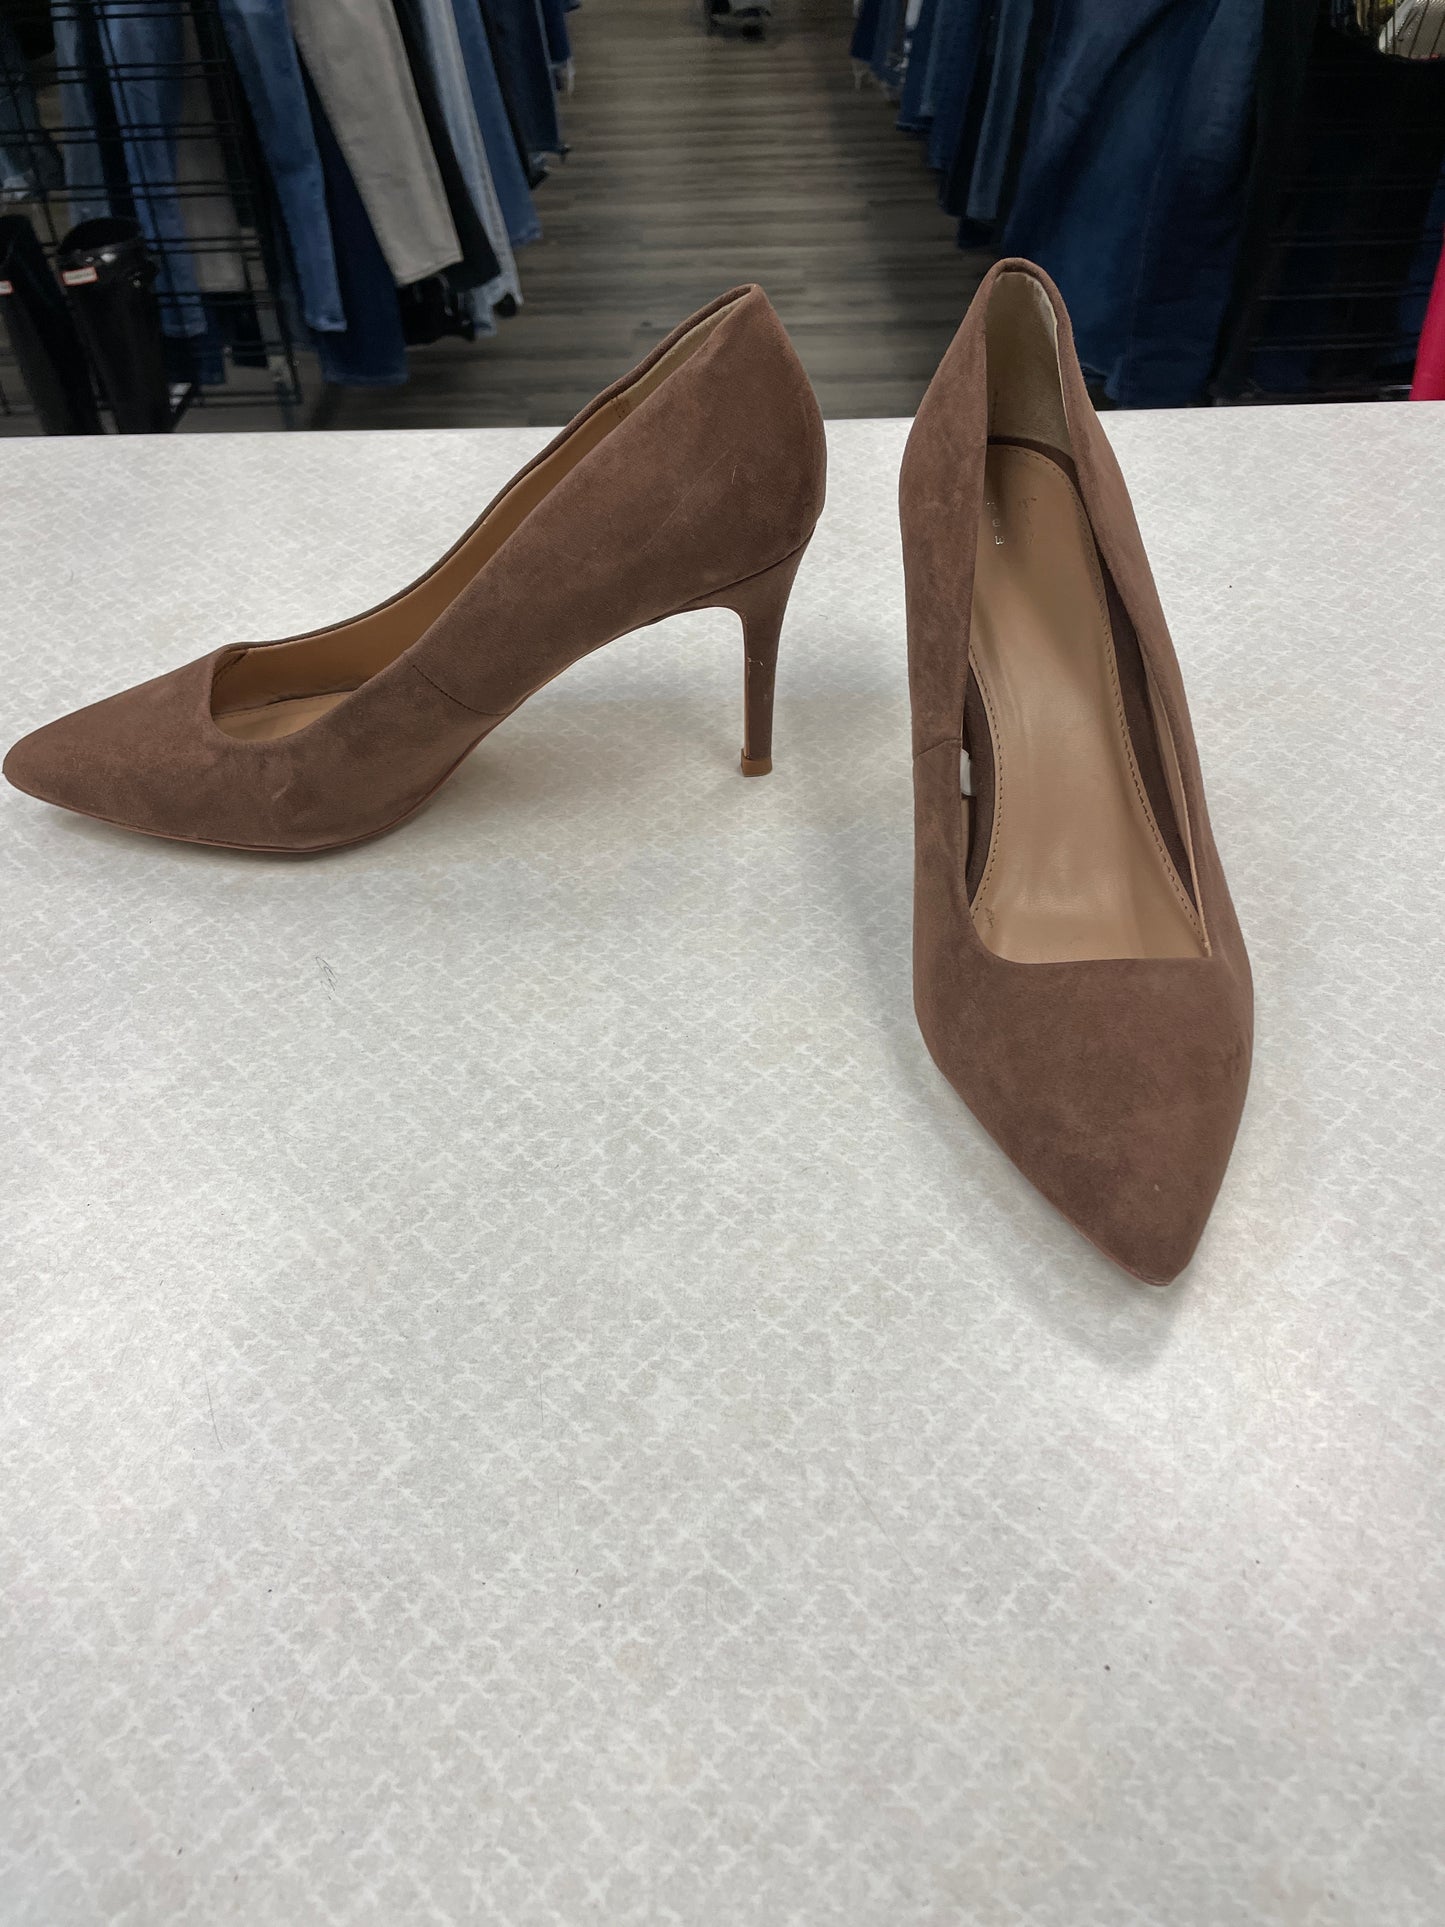 Shoes Heels Stiletto By A New Day  Size: 9.5